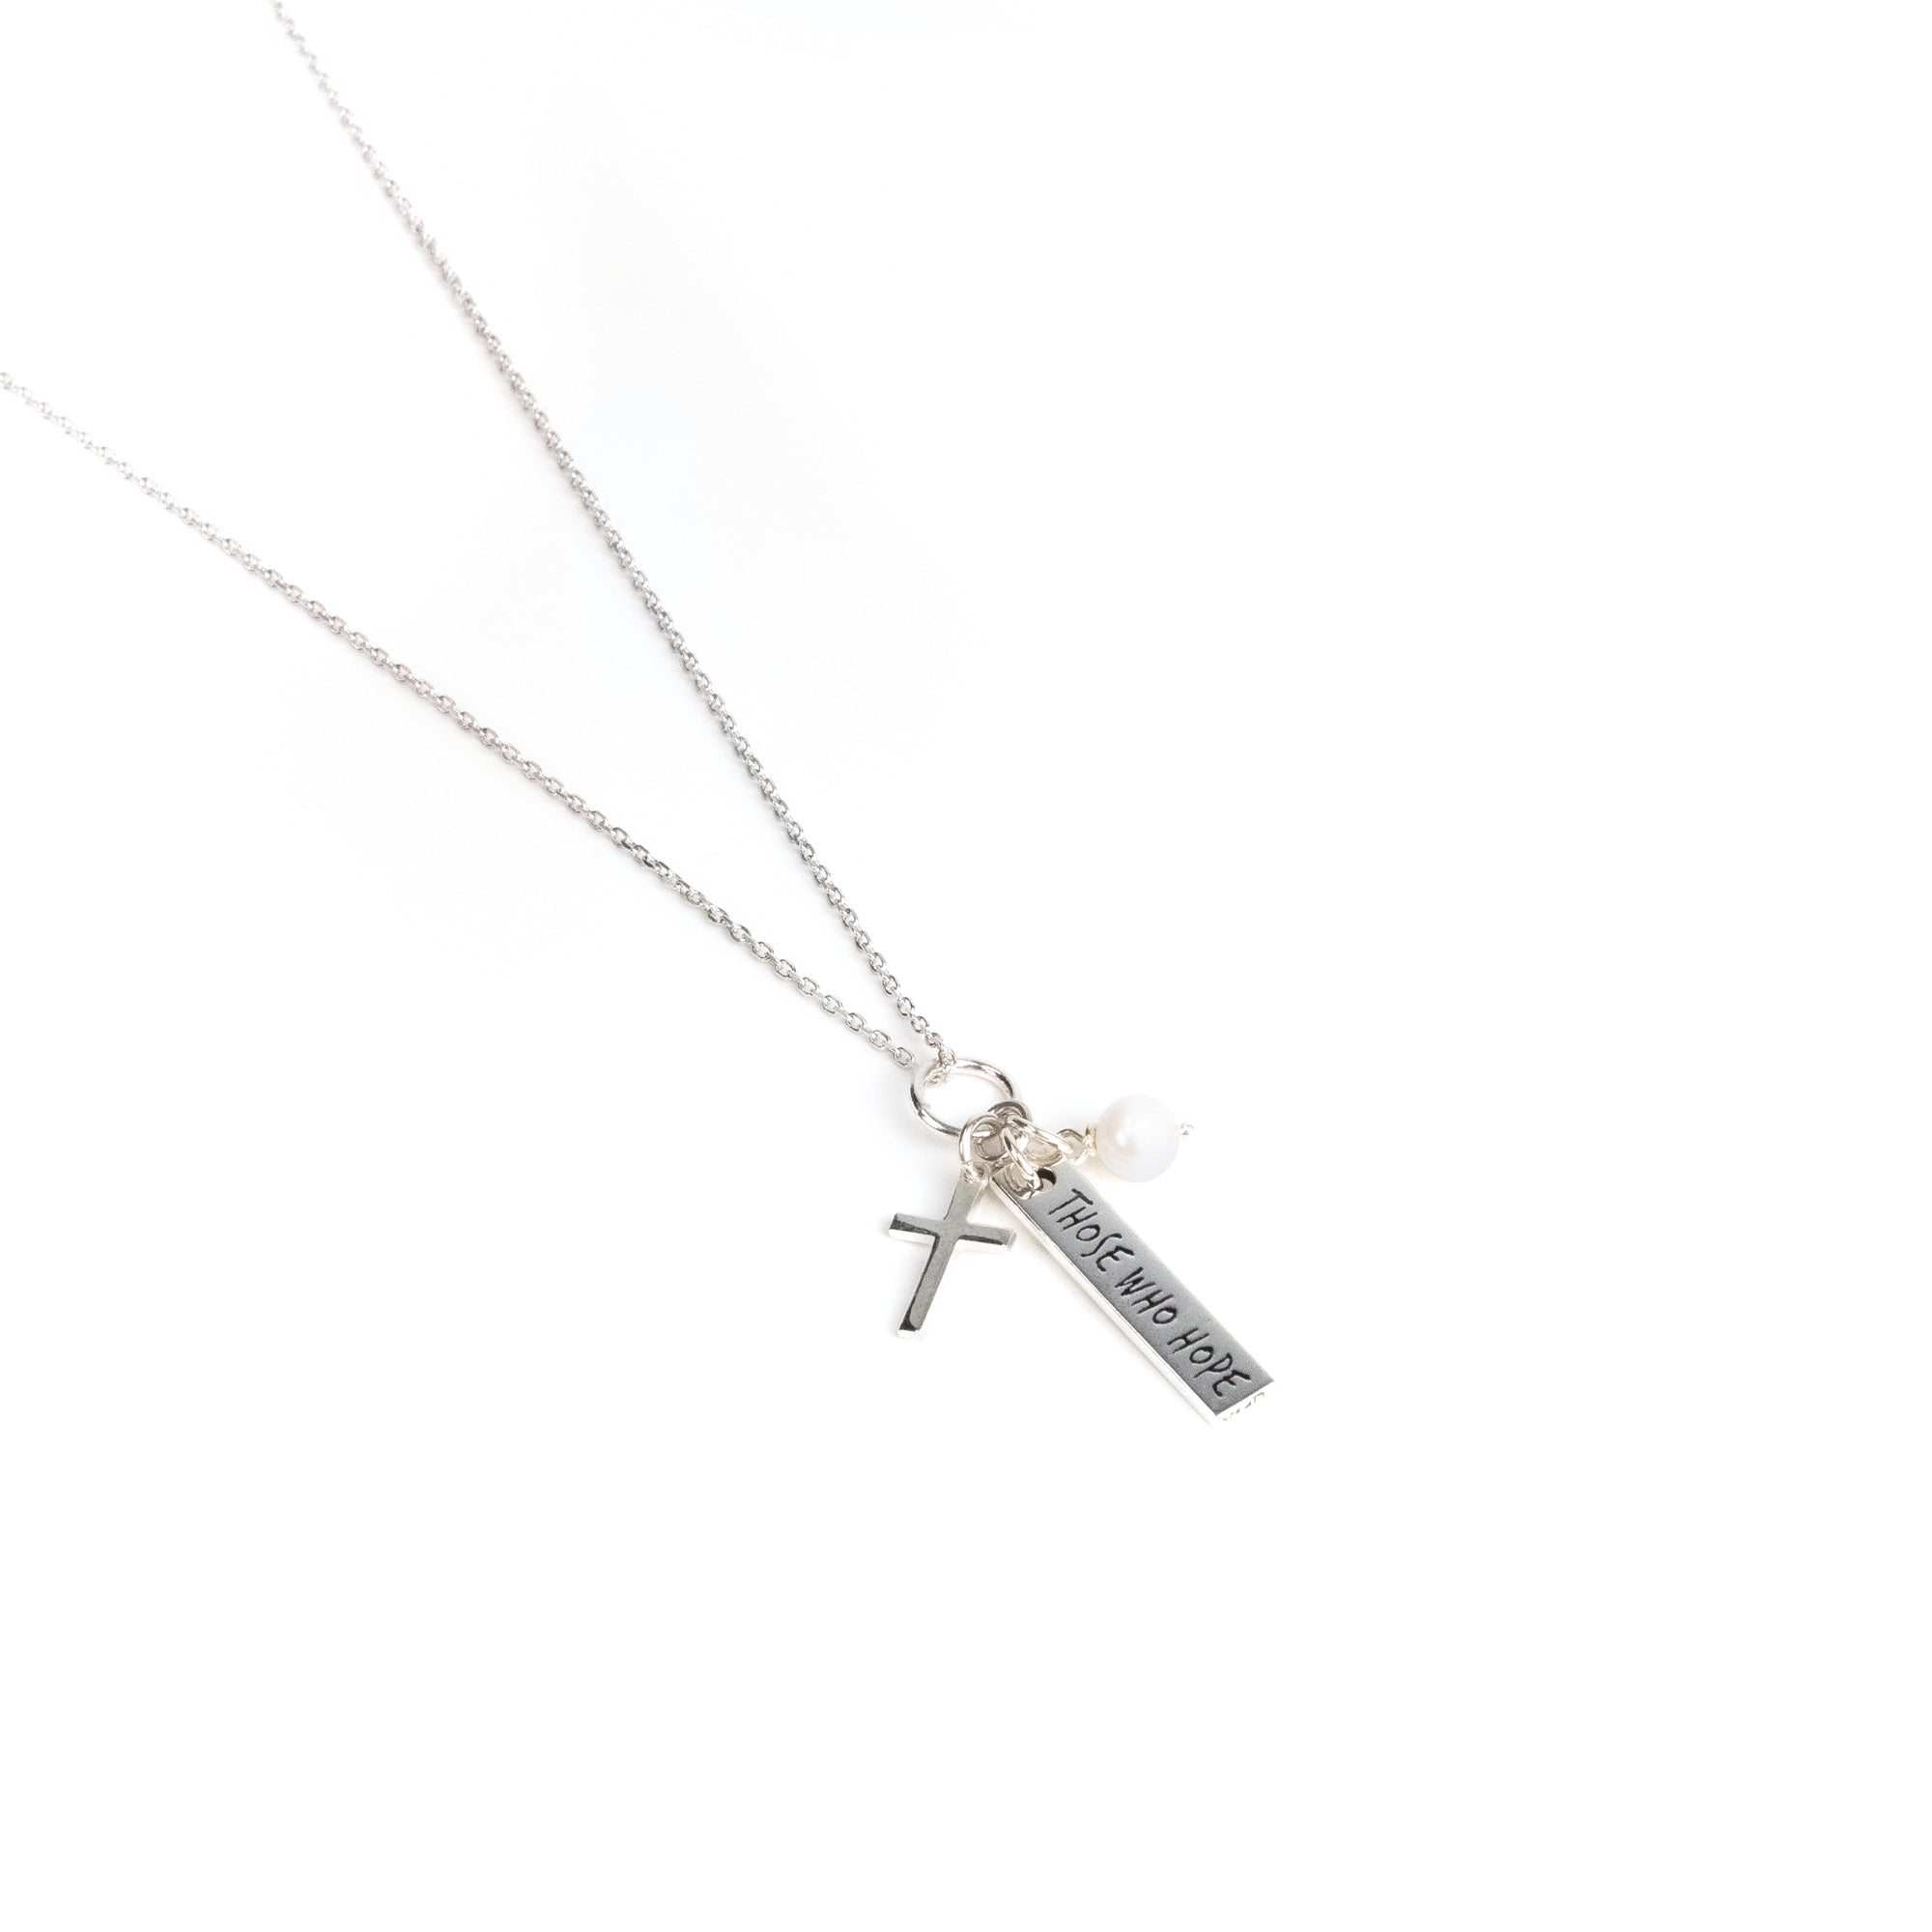 Those Who Hope, Sterling Silver Scripture Cross Necklace